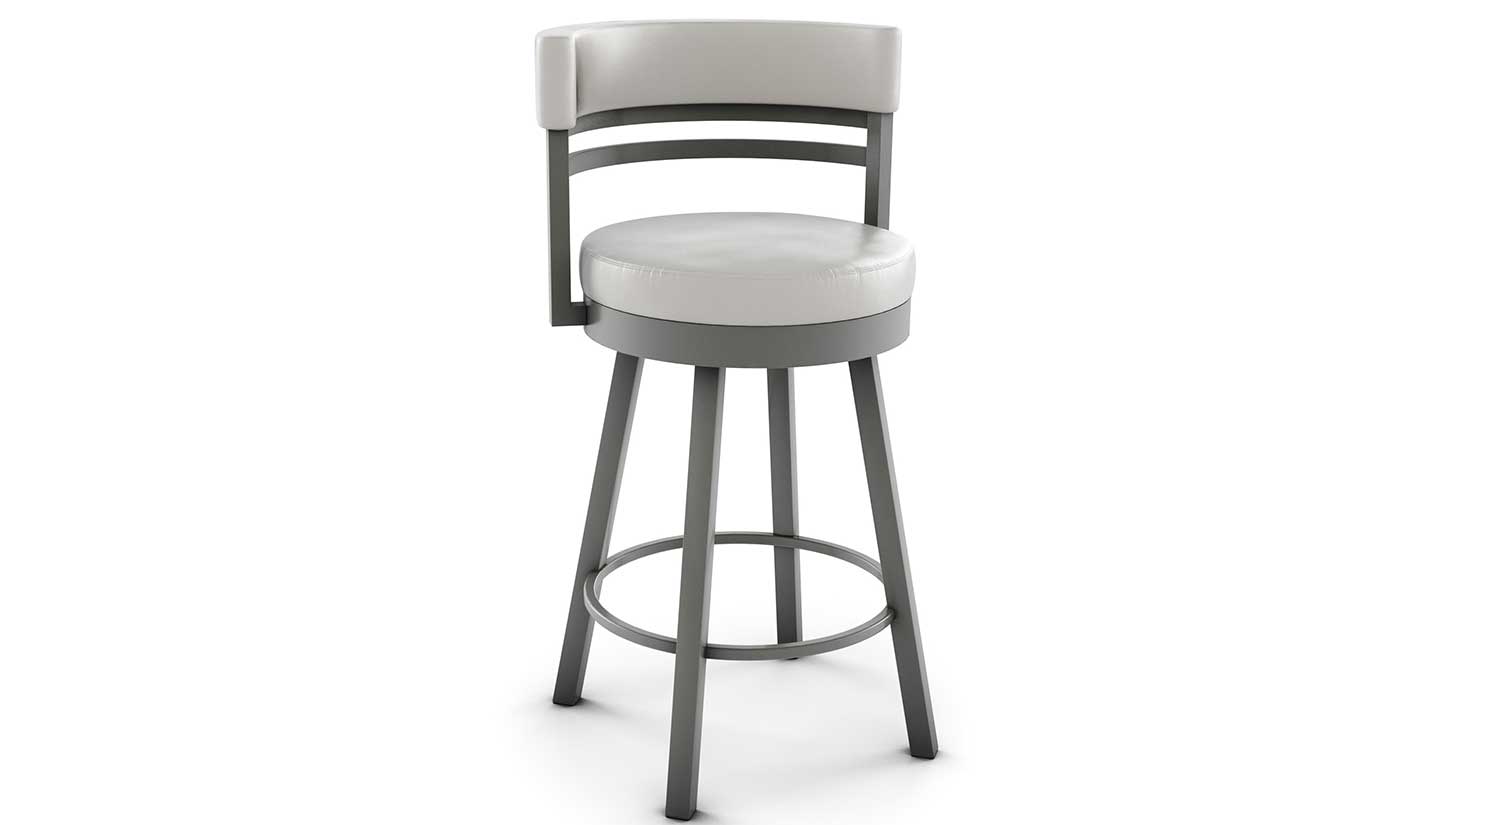 bar stool, counter stool, kitchen, dining room, dining space, cost, height, style